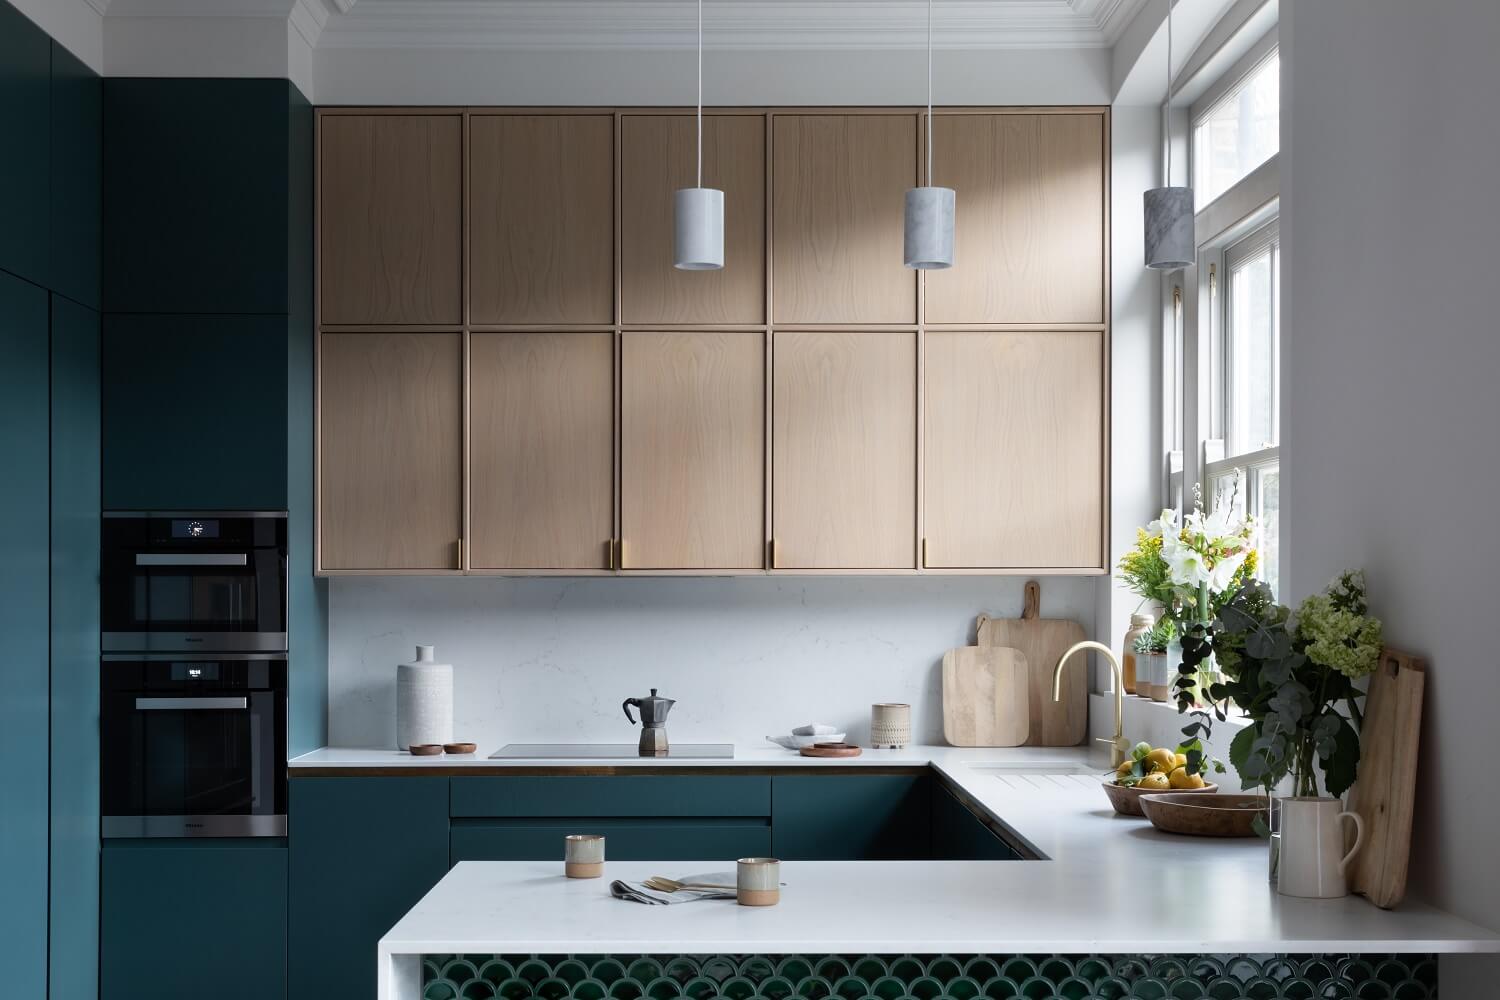 kitchen-modern-blue-cabinets-upper-cabinets-london-townhouse-nordroom